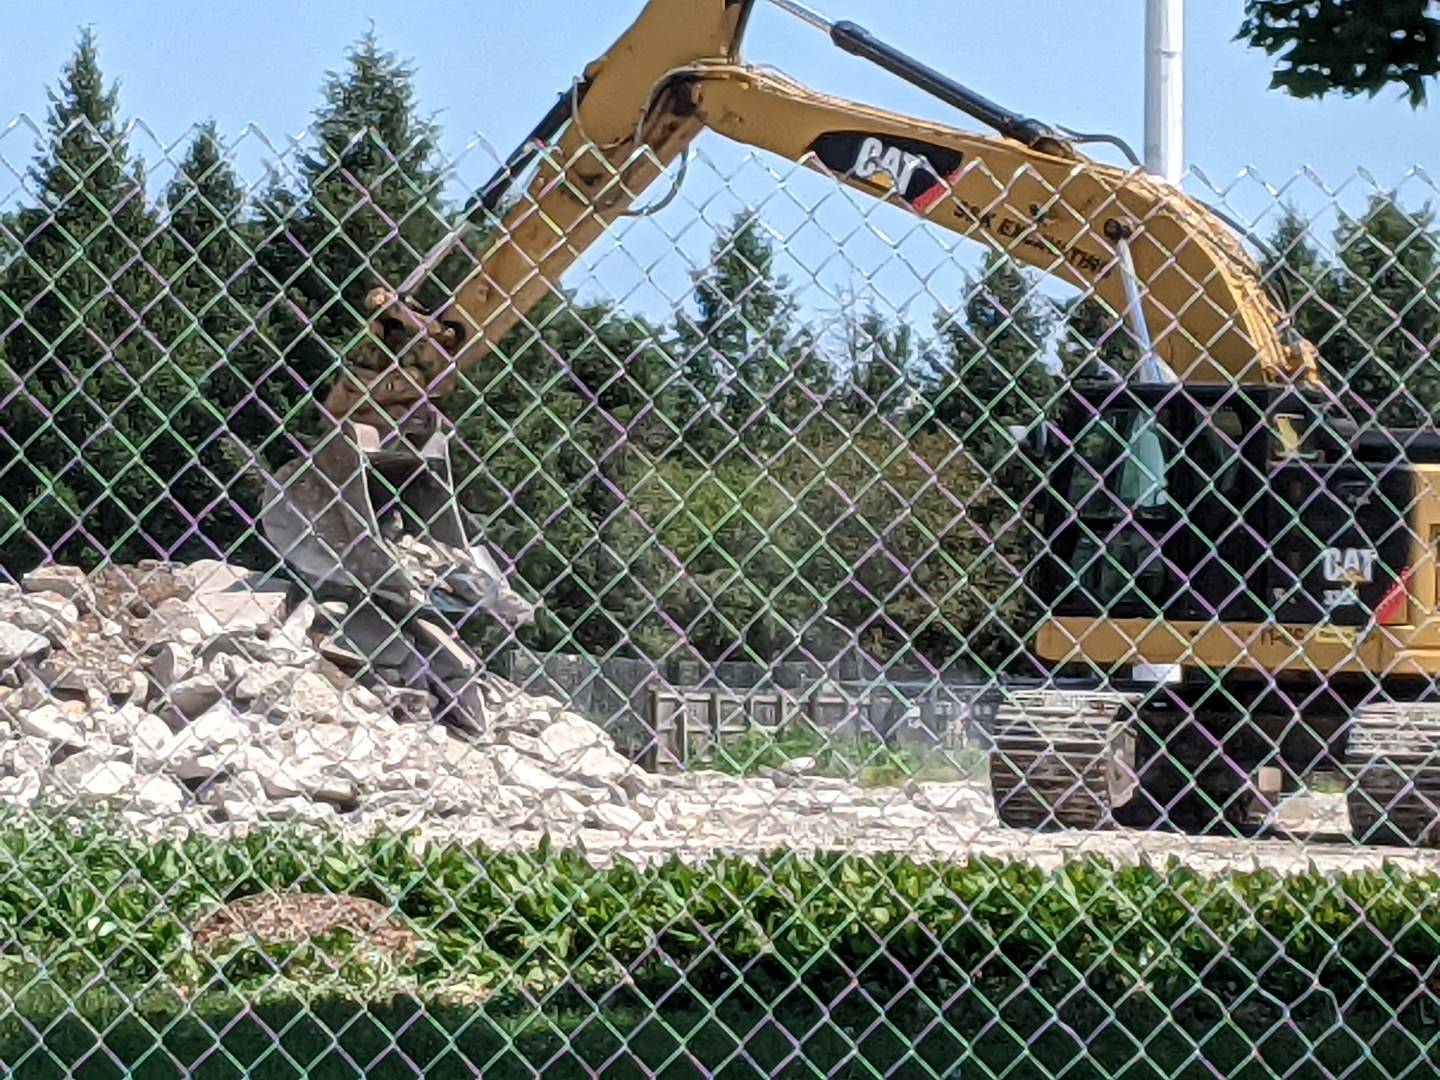 With Oswegoland Park District’s aging Prairie Point administration and operations center now razed, plans for its new building are moving forward.